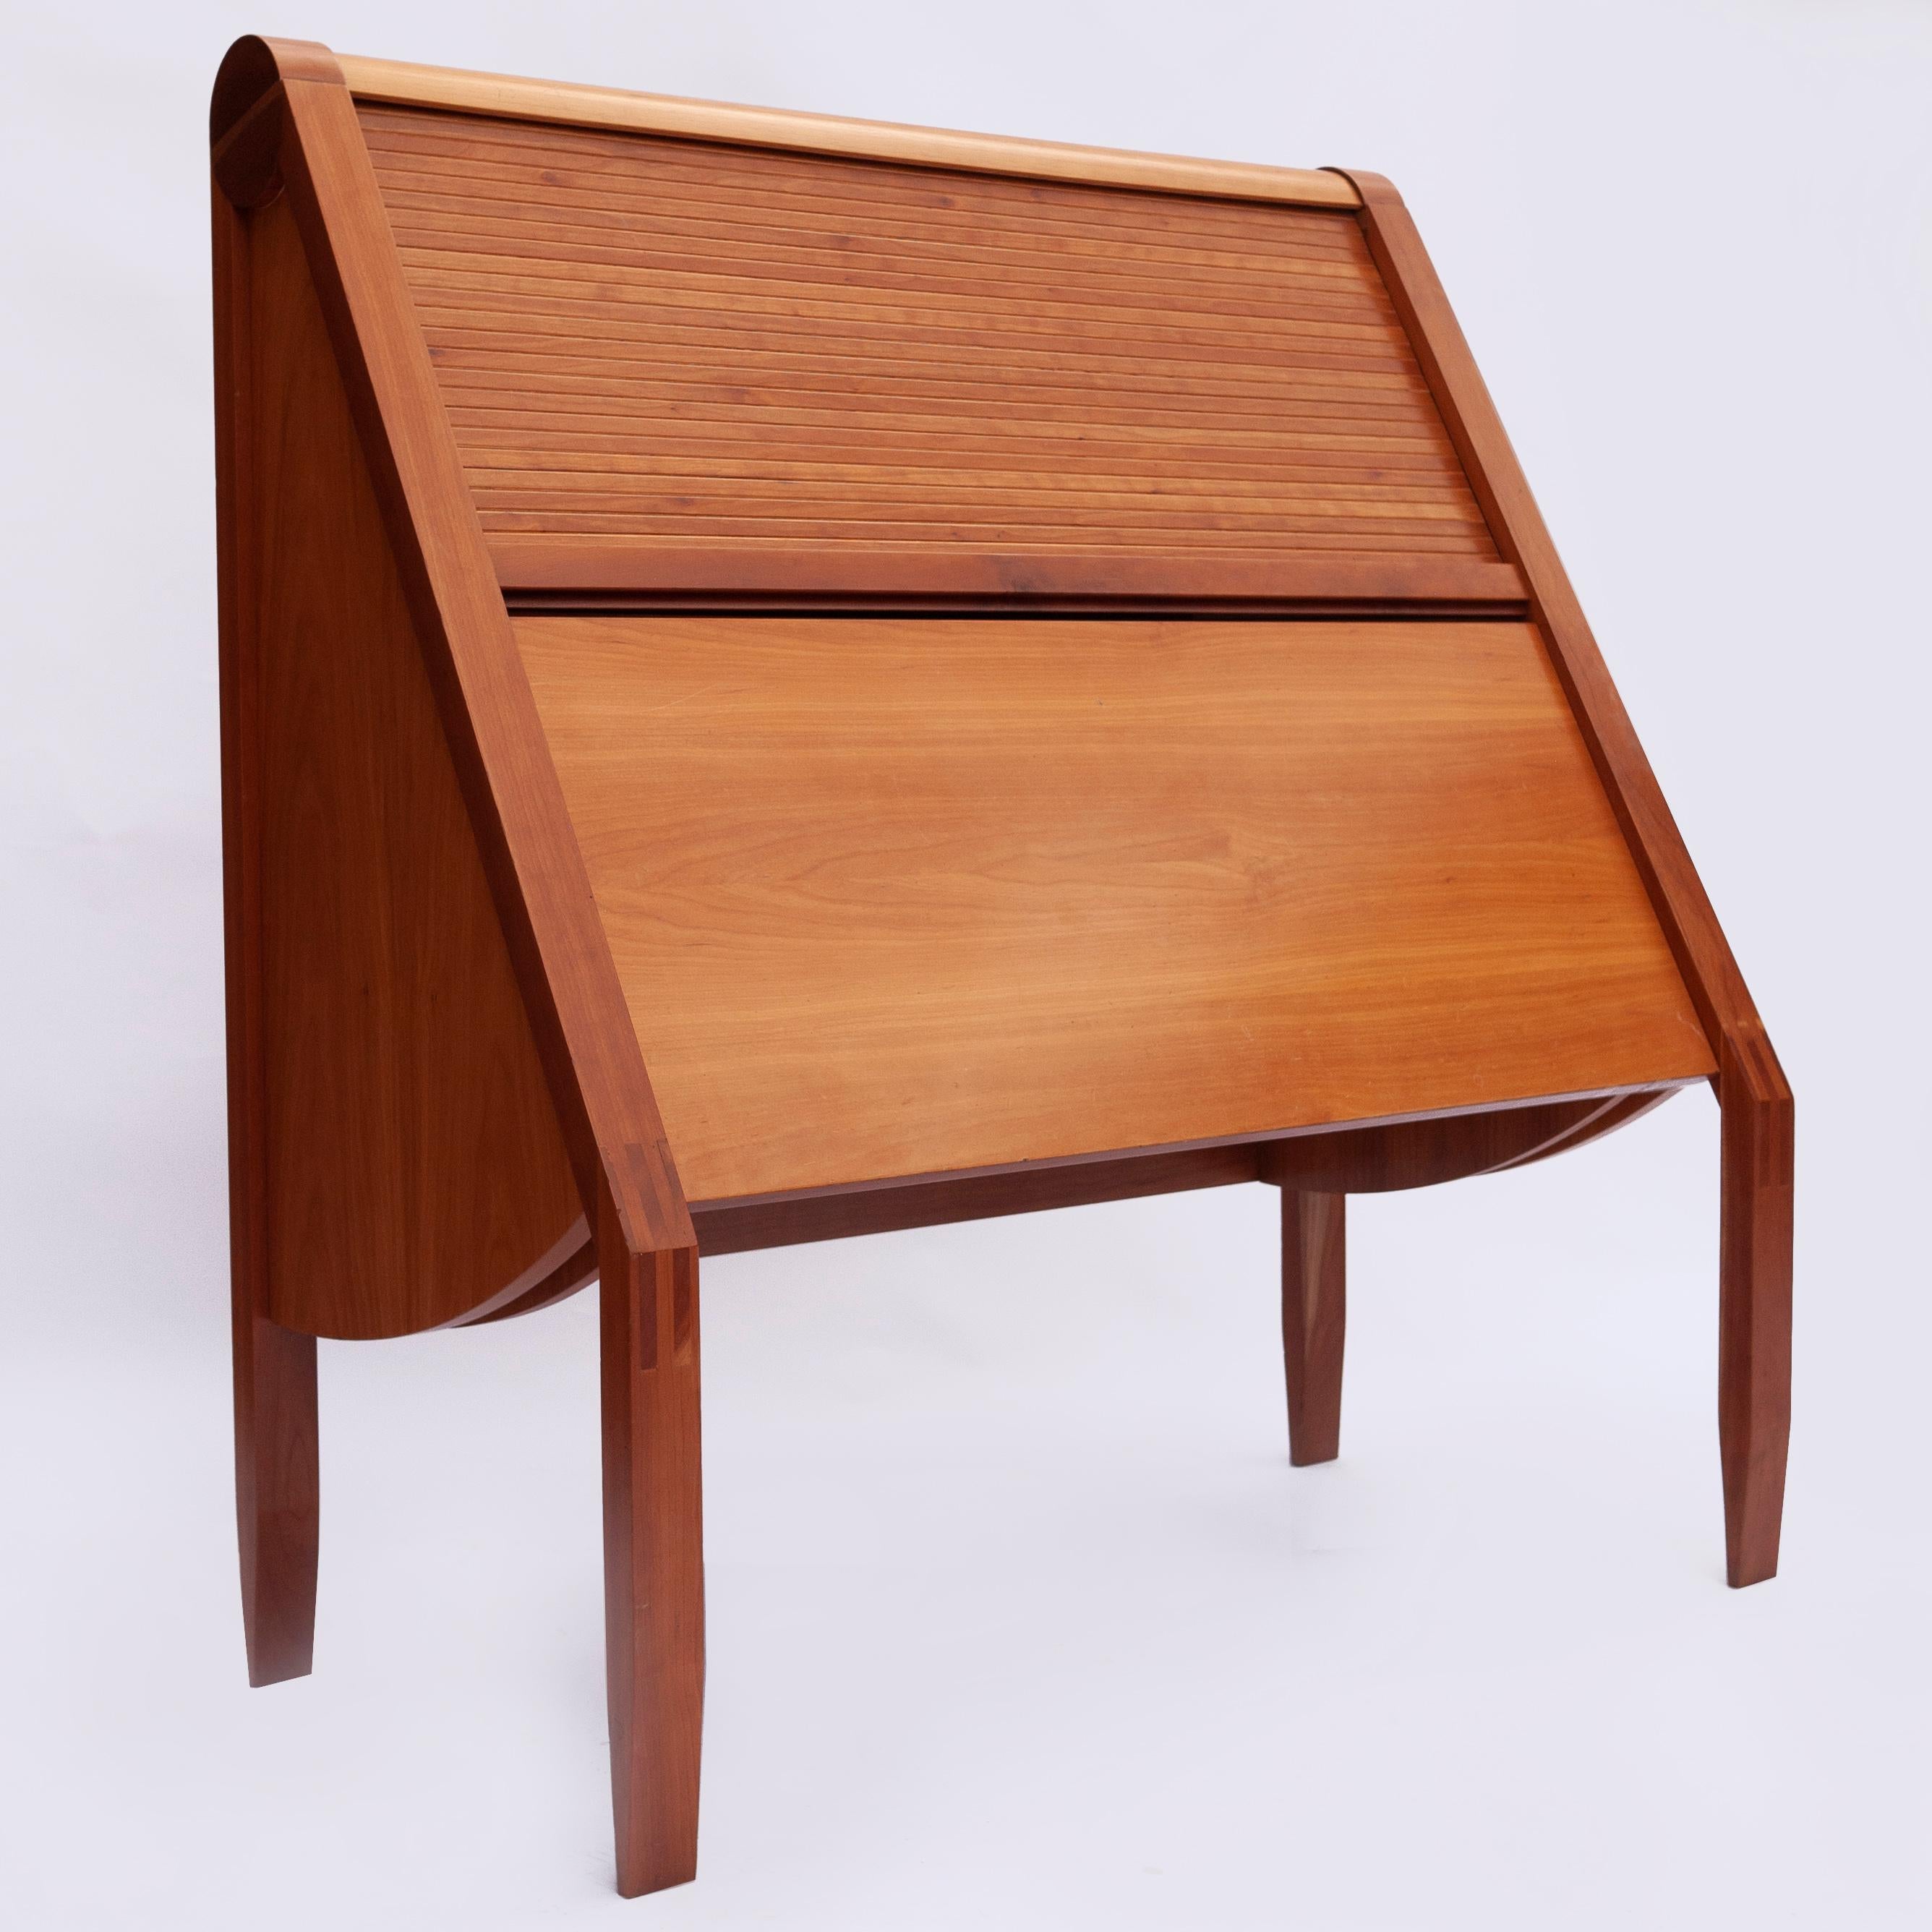 A cherry wood Bureau by Pedro Miralles Claver For Punt Mobels.

Designer - Pedro Miralles Claver

Manufacturer - Punt Mobels

Design period - 1990 to 1999

Country of manufacture - Spanish

Style - Vintage

Detailed condition - Good with